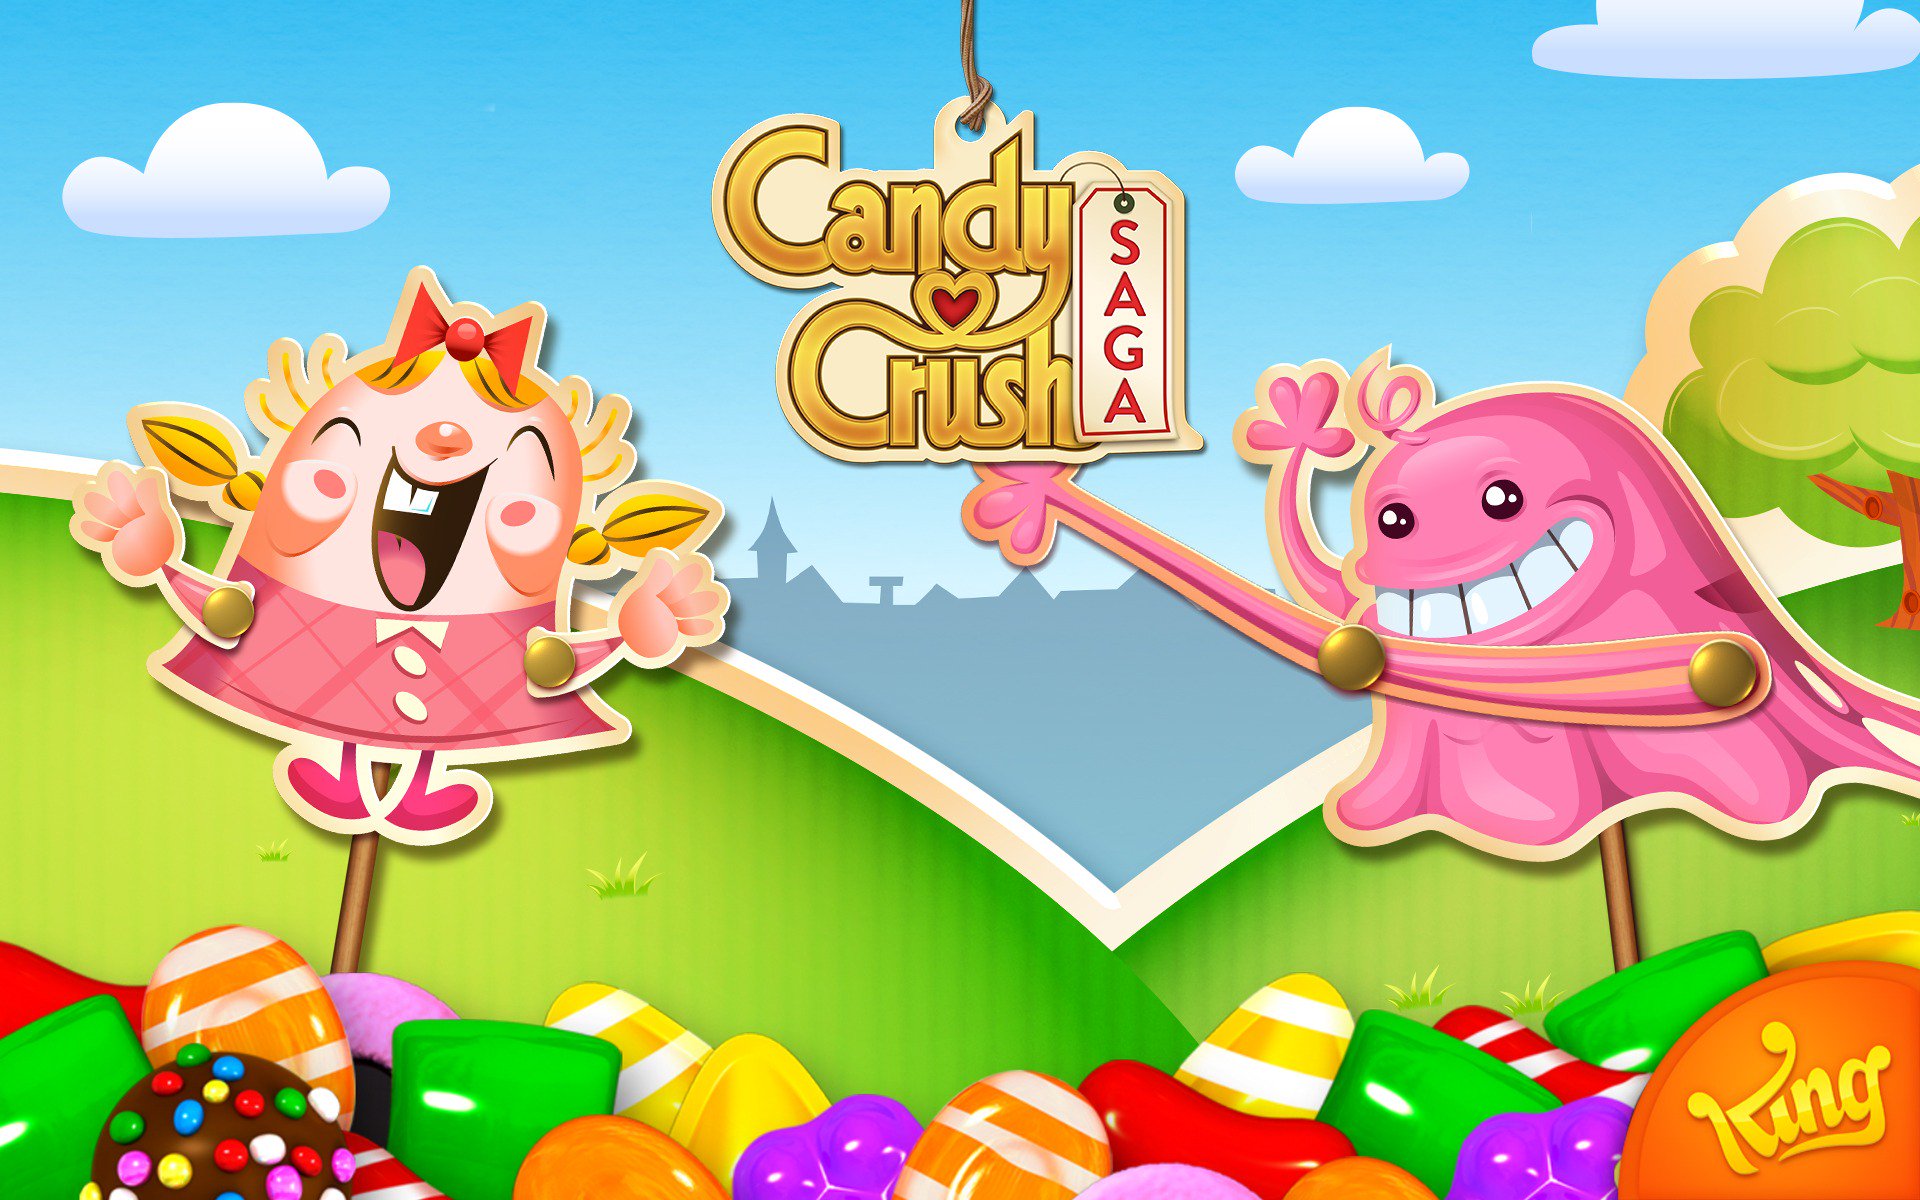 Candy crush mod apk unlimited moves